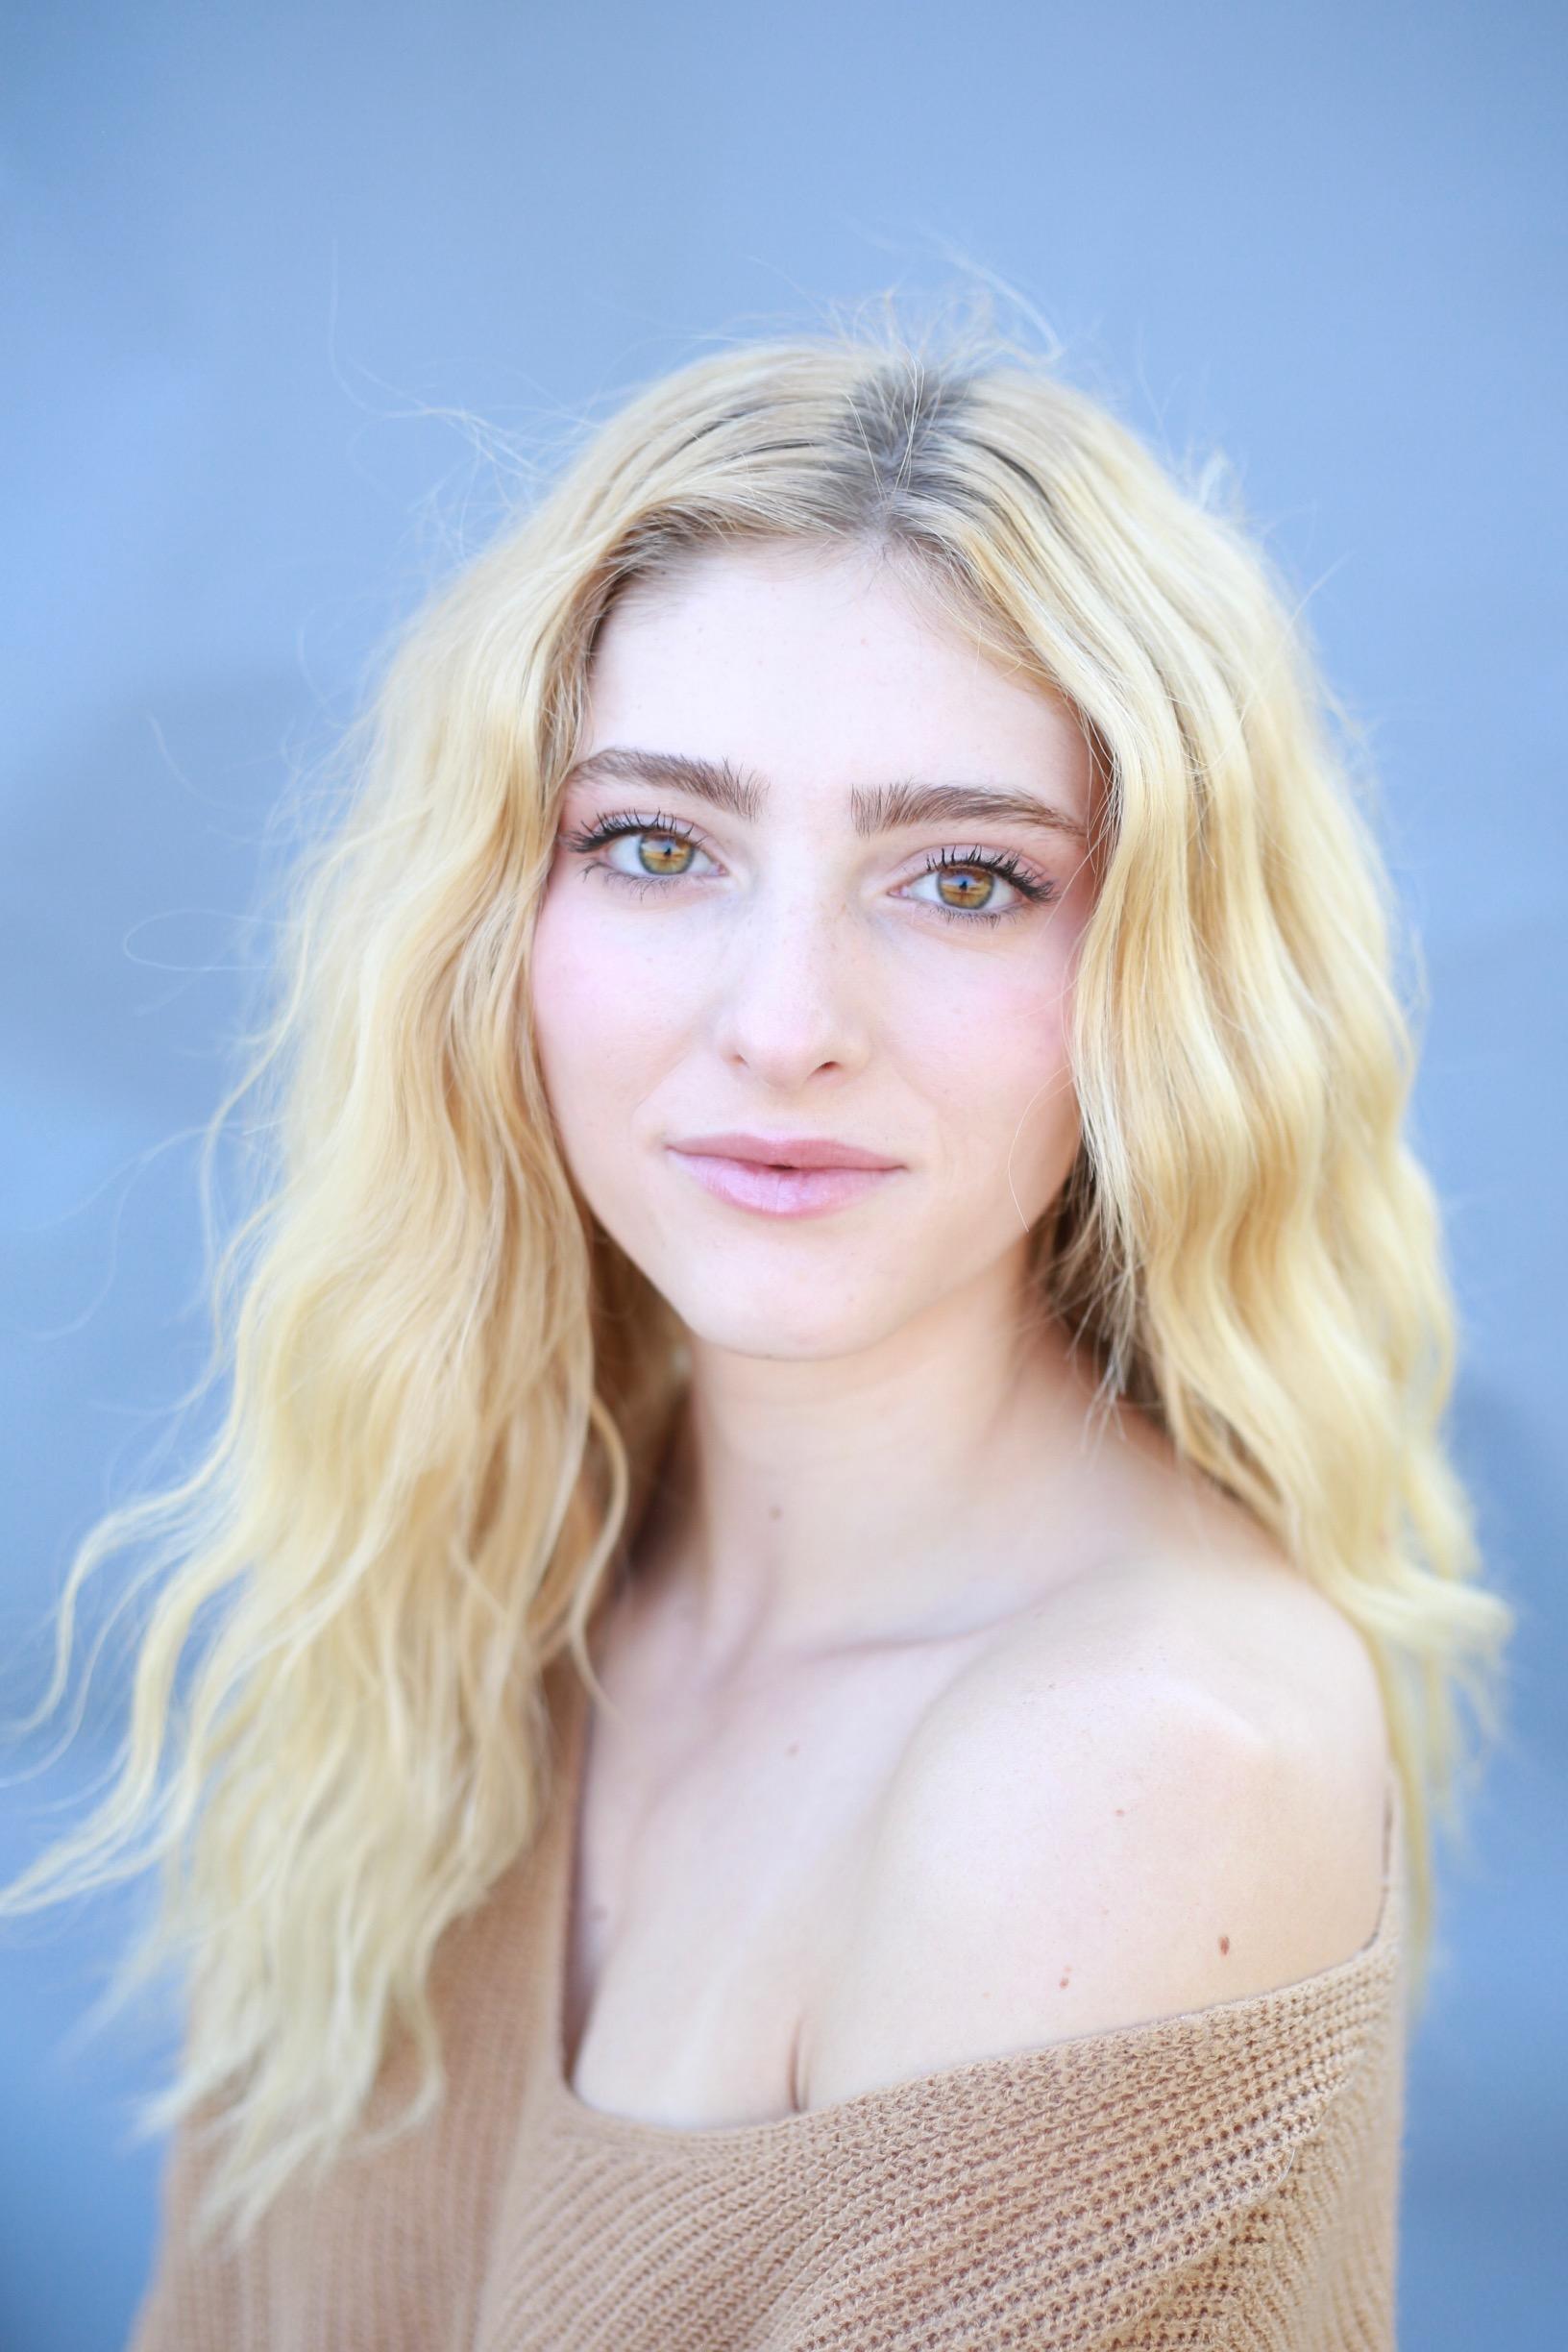 Willow Shields image